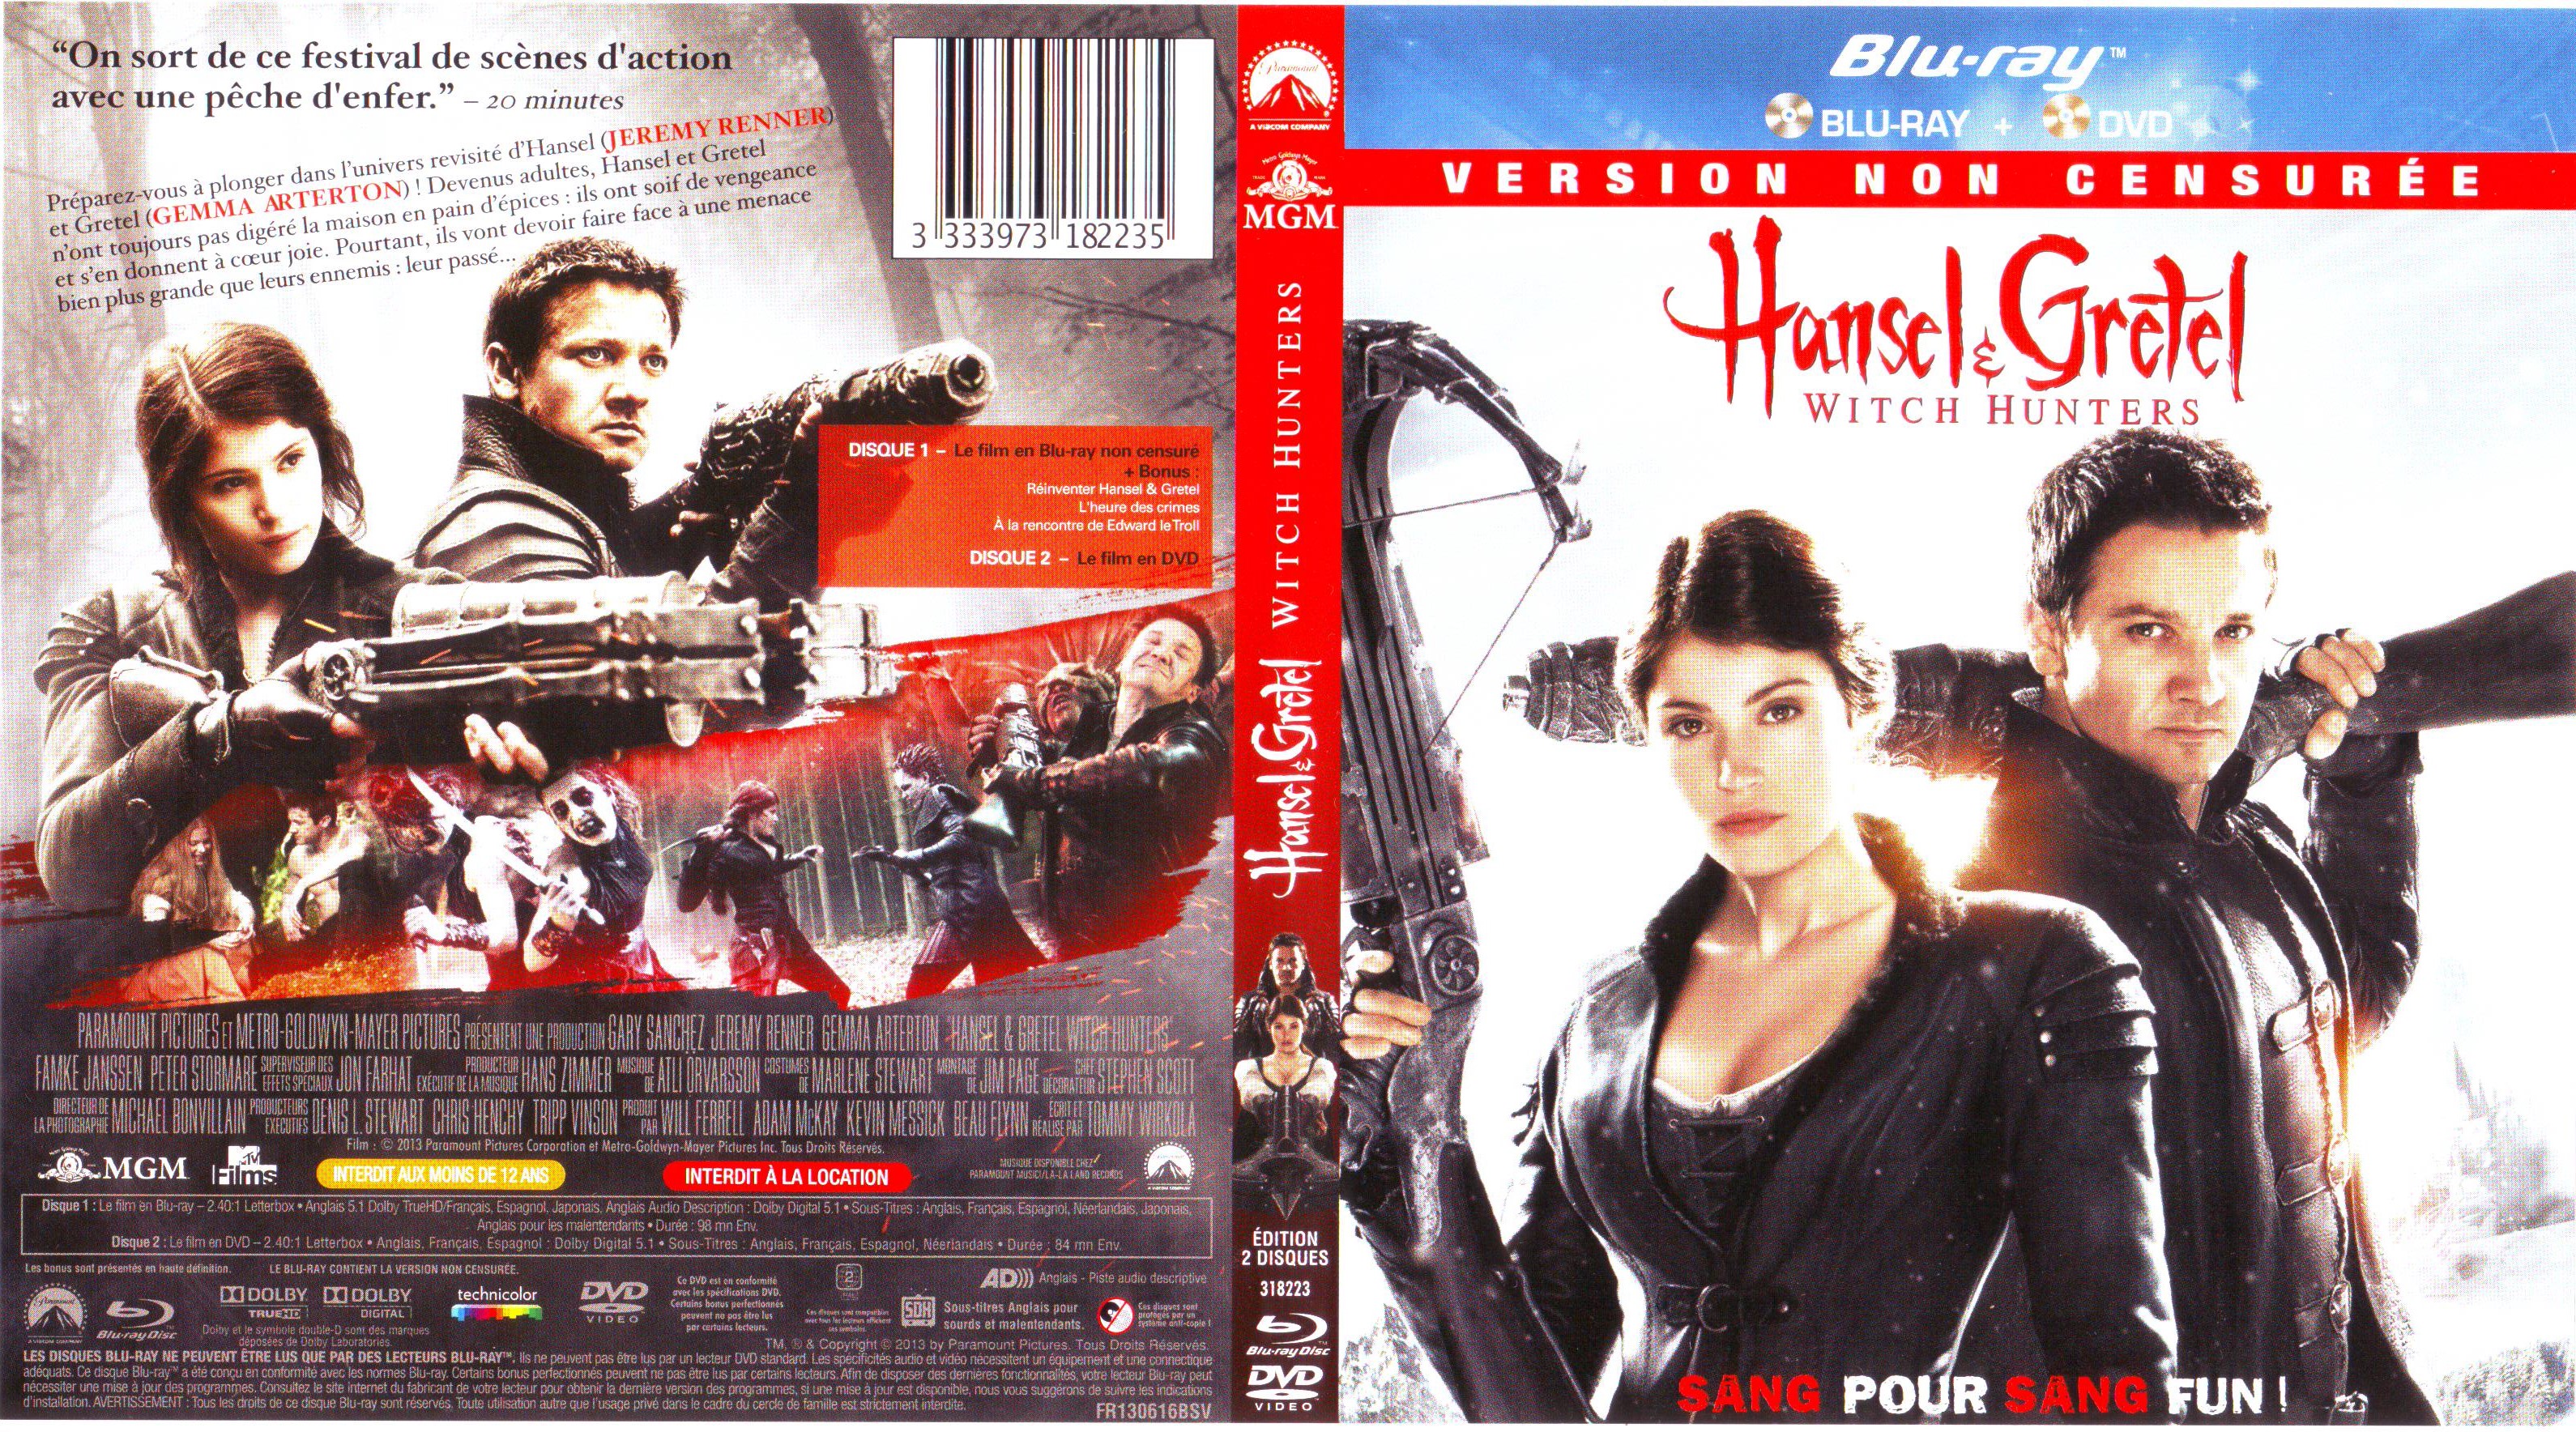 Jaquette DVD Hansel et Gretel Witch Hunters (BLU-RAY)